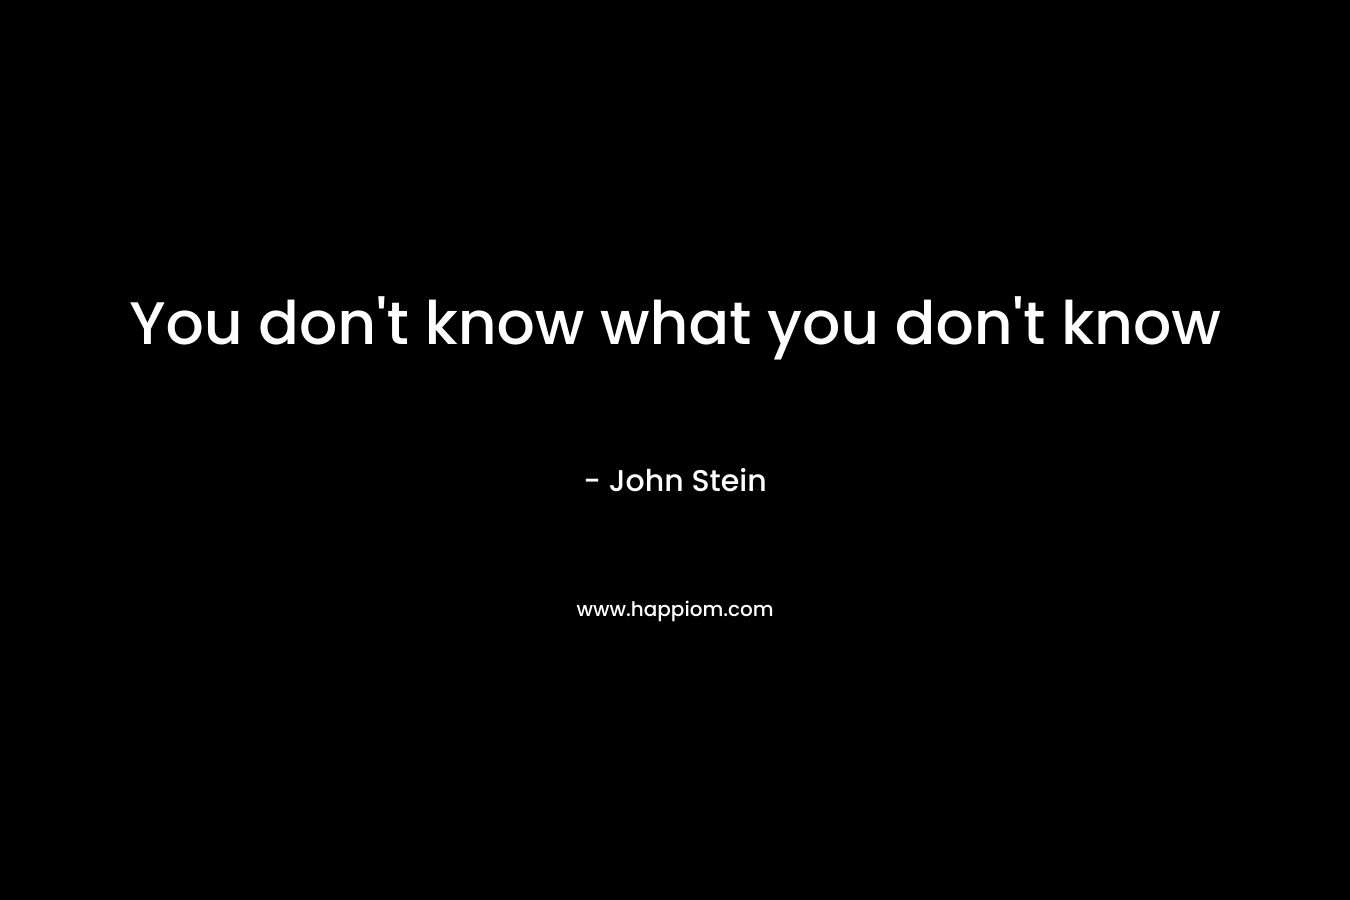 You don't know what you don't know